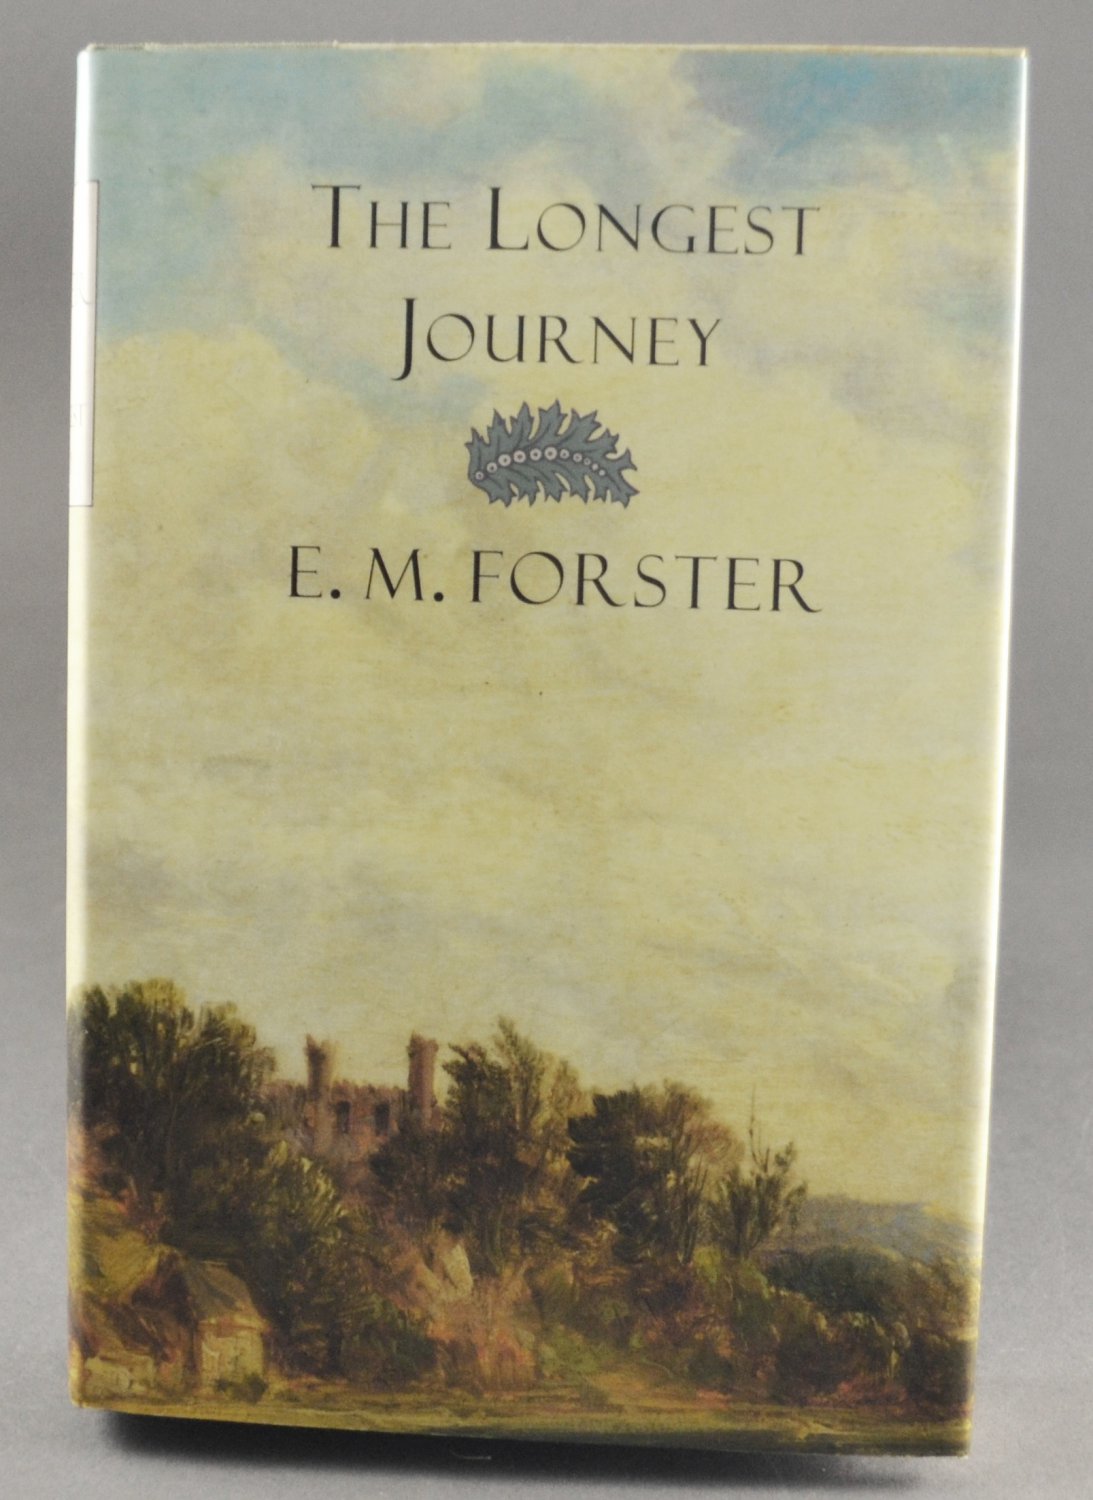 the longest journey by em forster